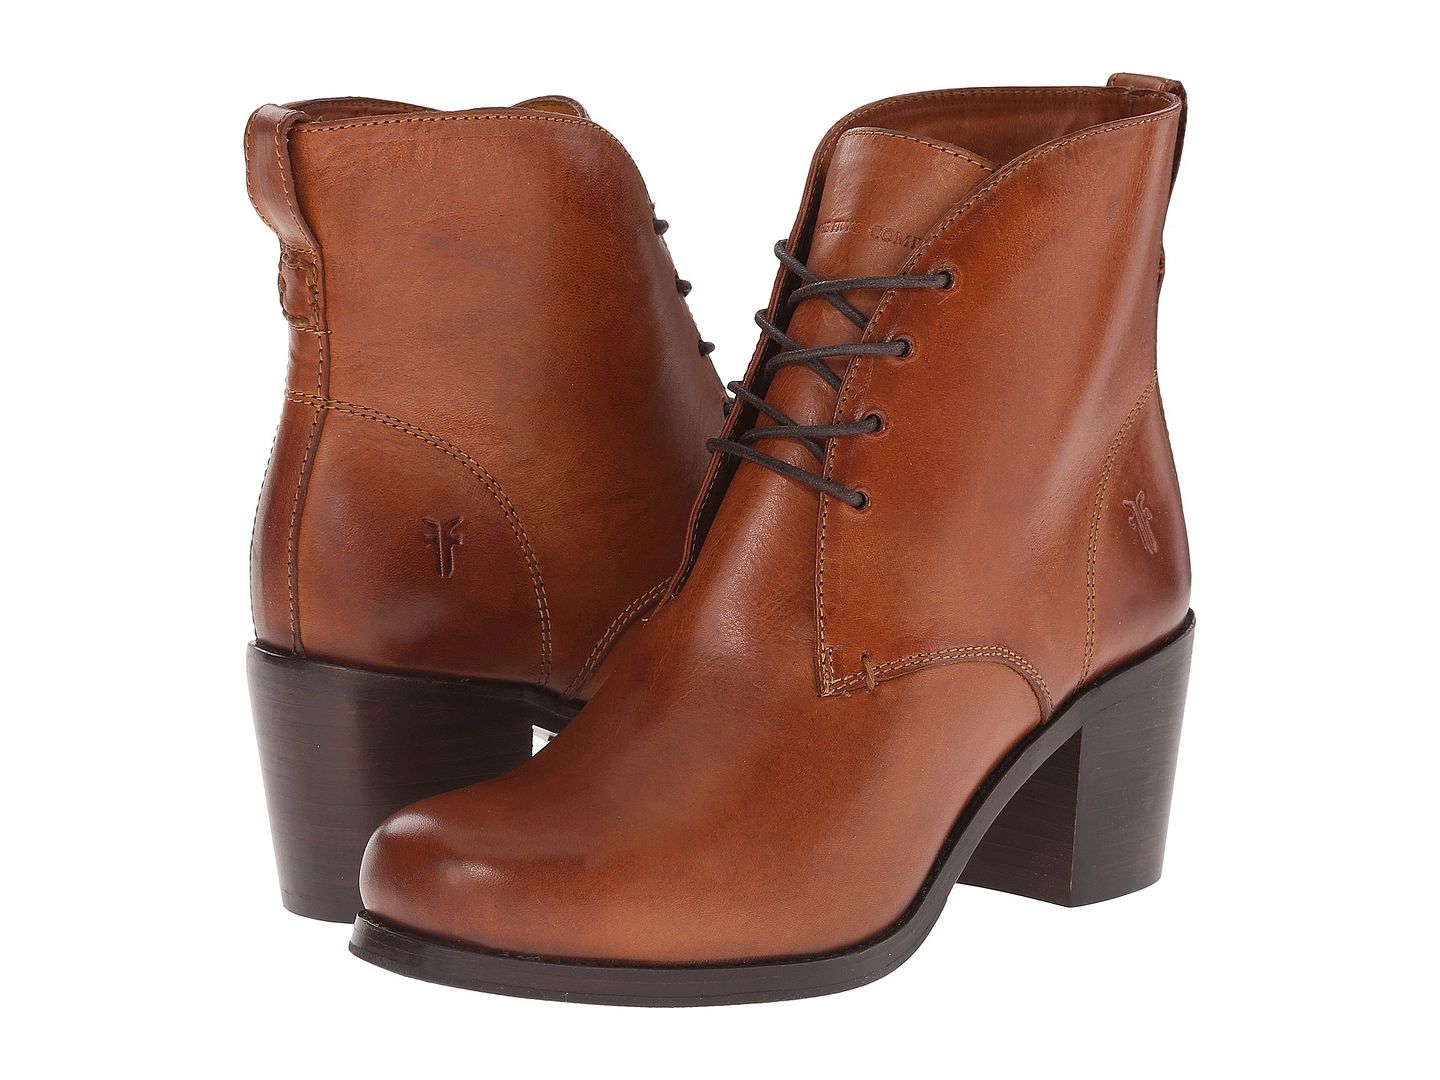 Frye chukka ankle boots : Right on trend, with a slightly taller boot that makes them perfect for dressing up too